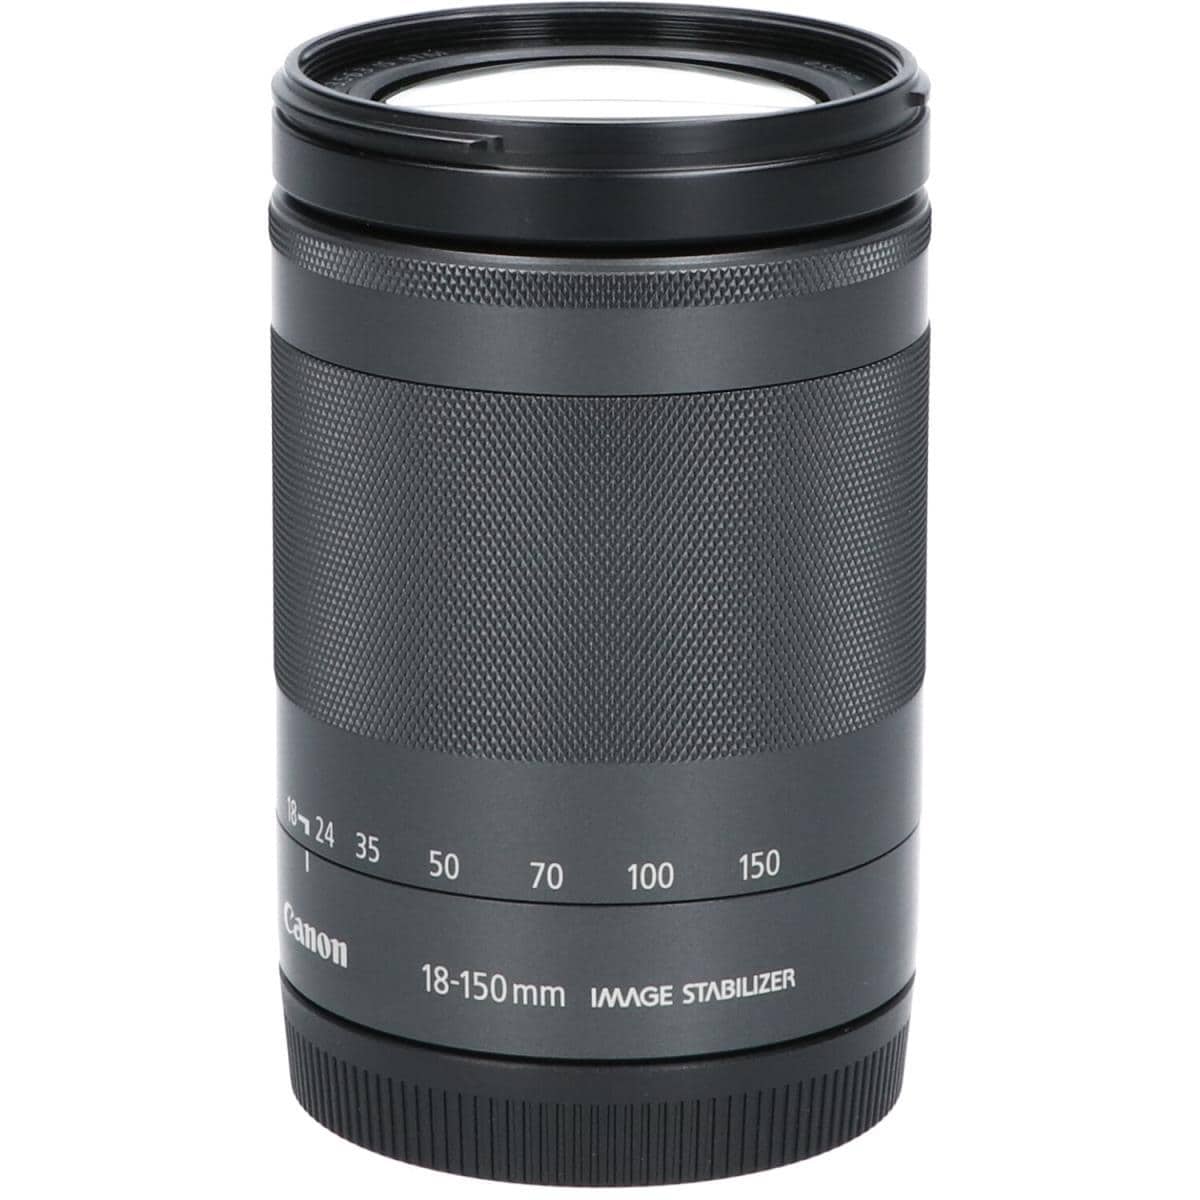 CANON EF-M18-150mm F3.5-6.3IS STM